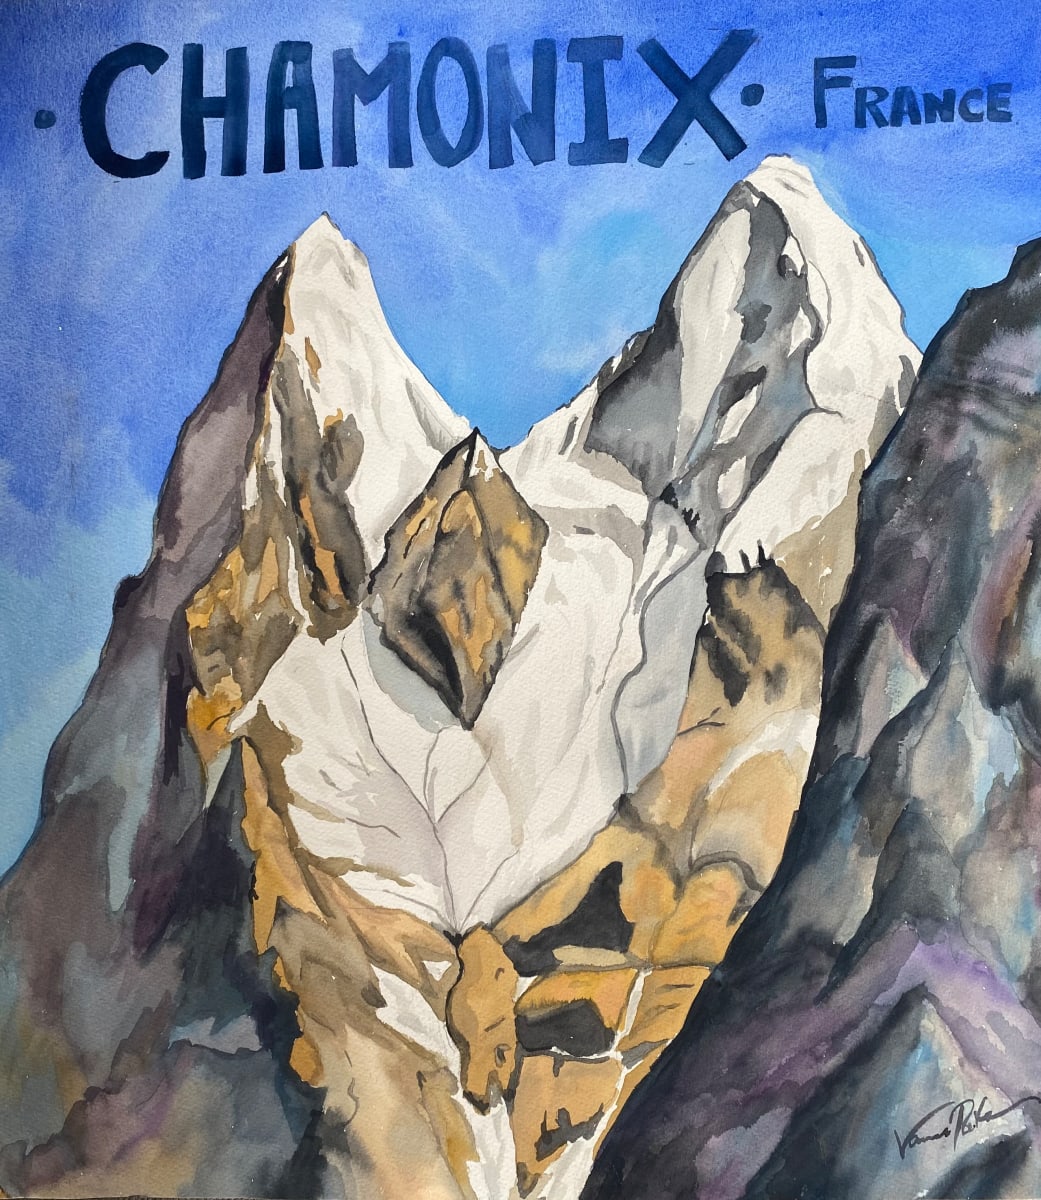 Chamonix Alps by Vanessa Rothe  Image: UNframed work of art , watercolor on paper